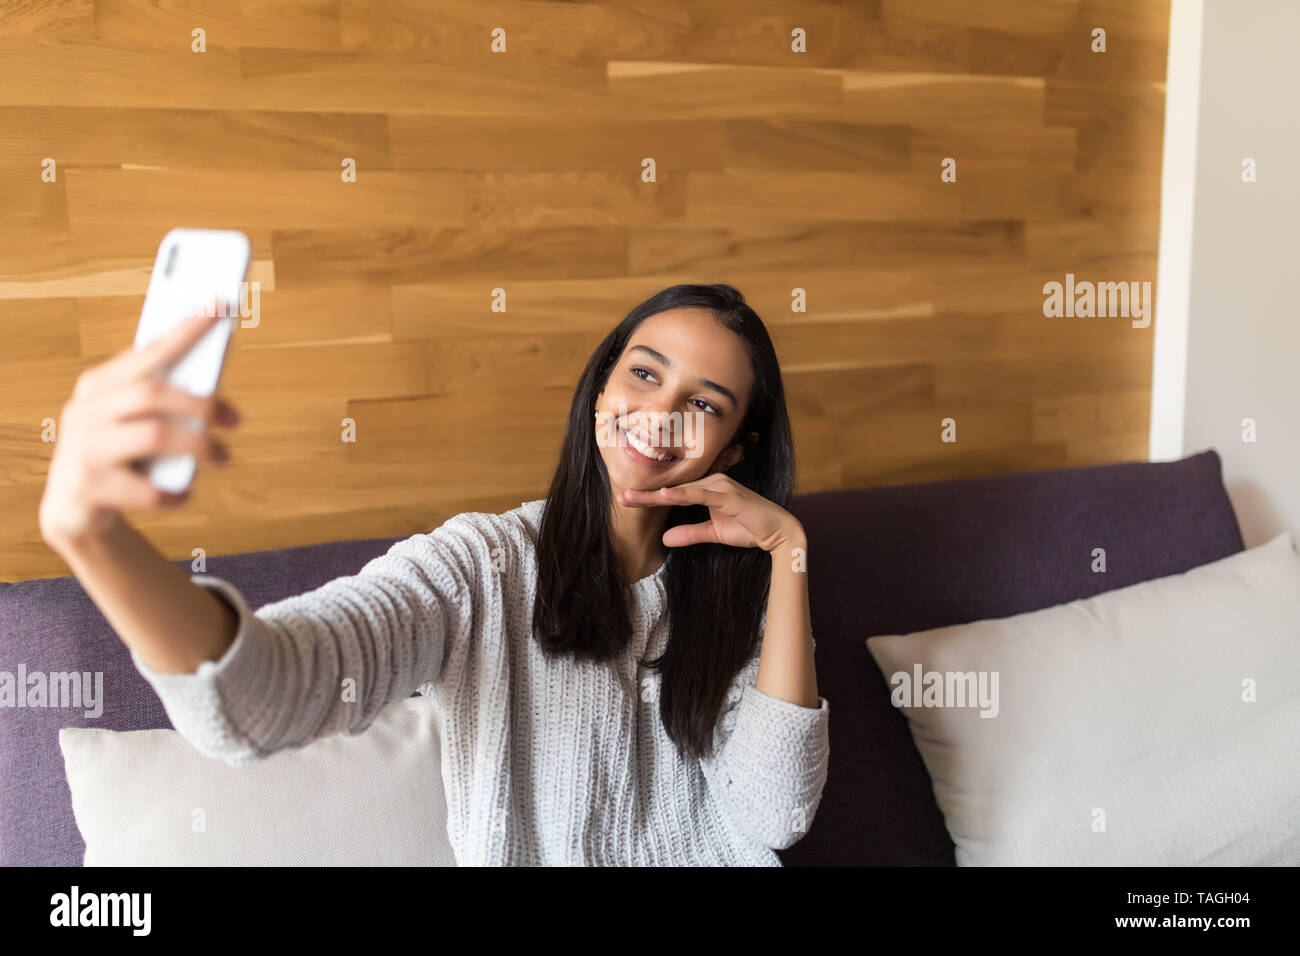 Portrait Of A Beautiful Brunette Taking A Selfie With Her Smart Phone